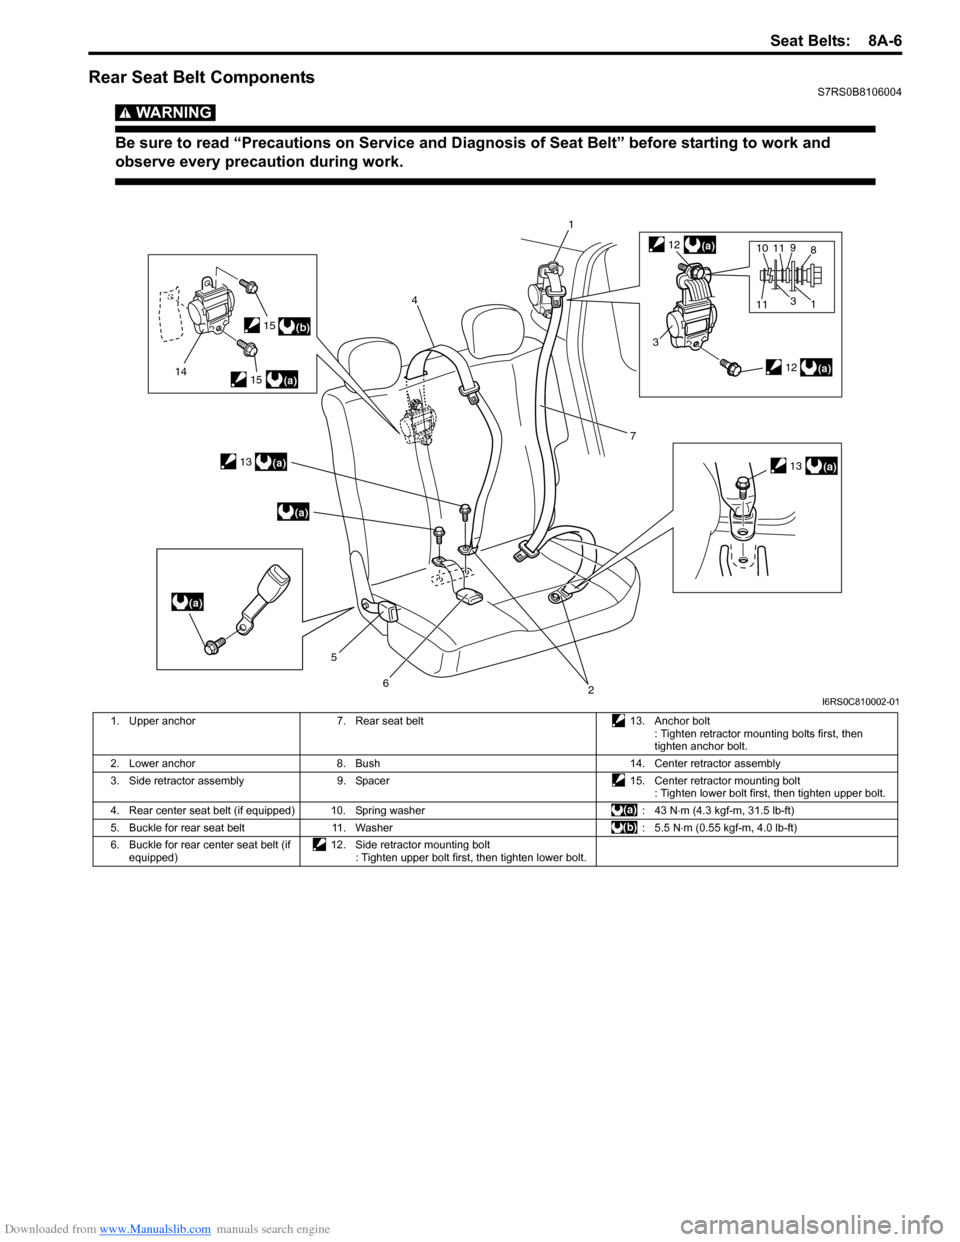 SUZUKI SWIFT 2008 2.G Service Workshop Manual Downloaded from www.Manualslib.com manuals search engine Seat Belts:  8A-6
Rear Seat Belt ComponentsS7RS0B8106004
WARNING! 
Be sure to read “Precautions on Service and Diagnosis of Seat Belt” befo